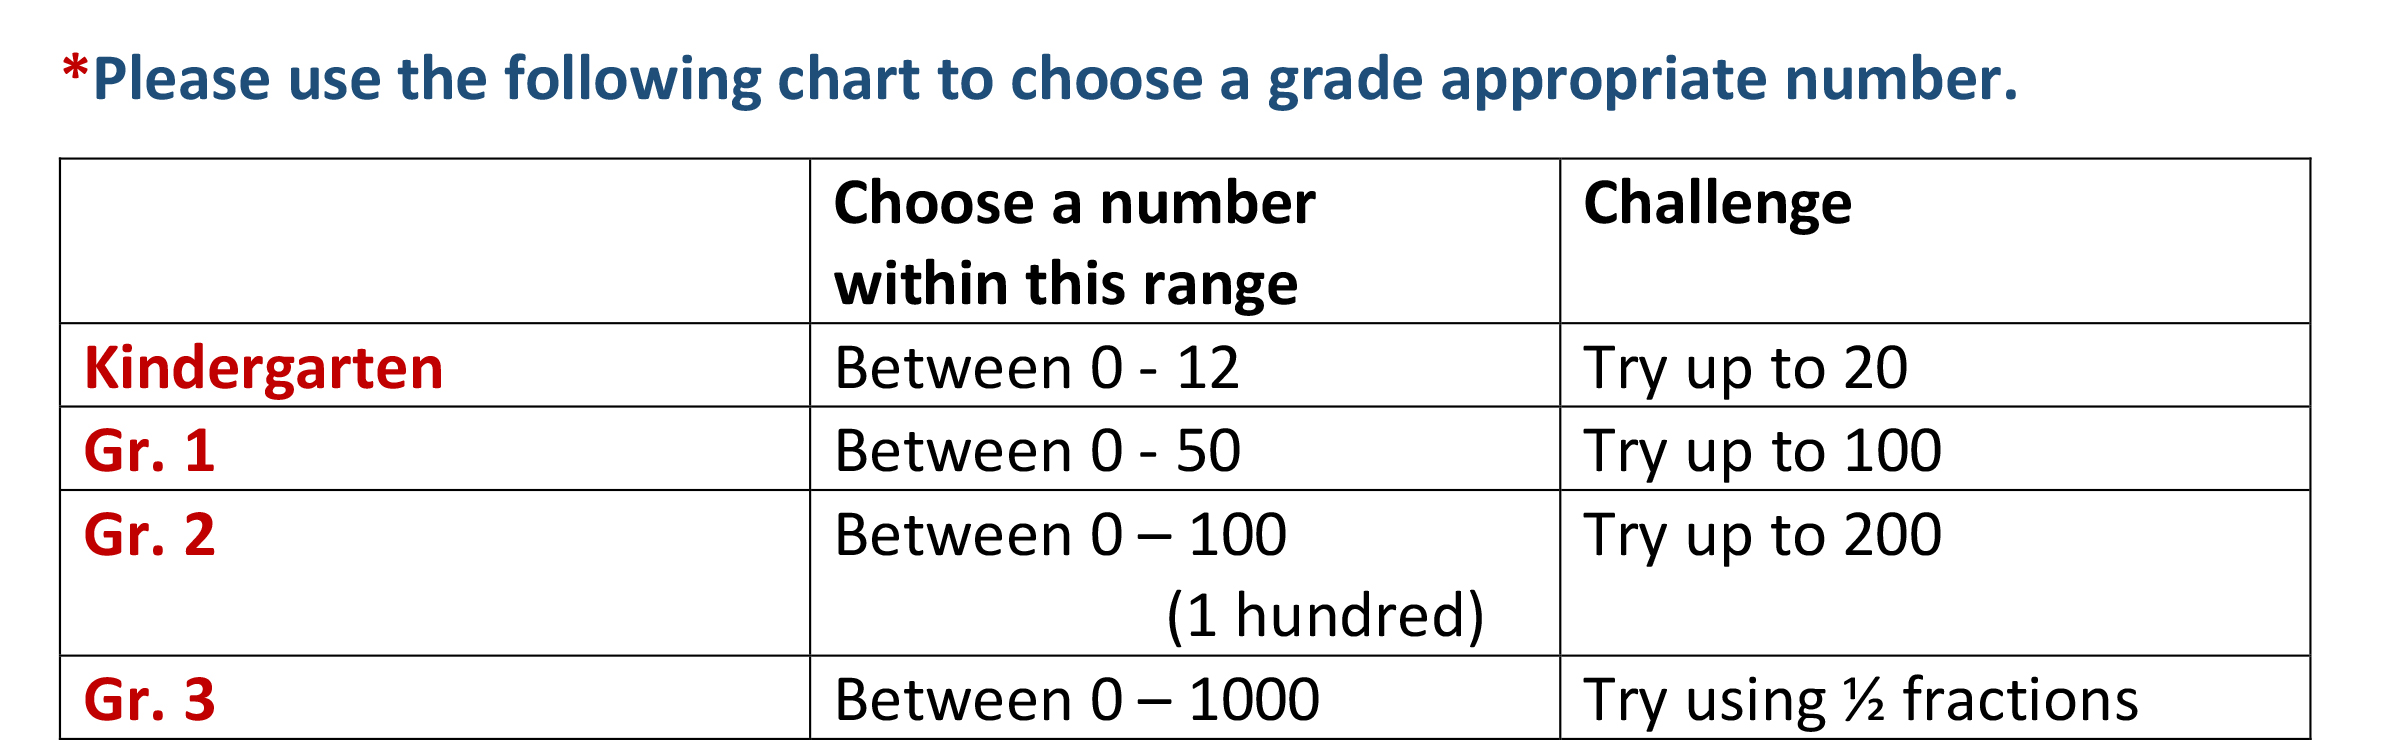 table illustrating amounts for students in Grades 1 to 3